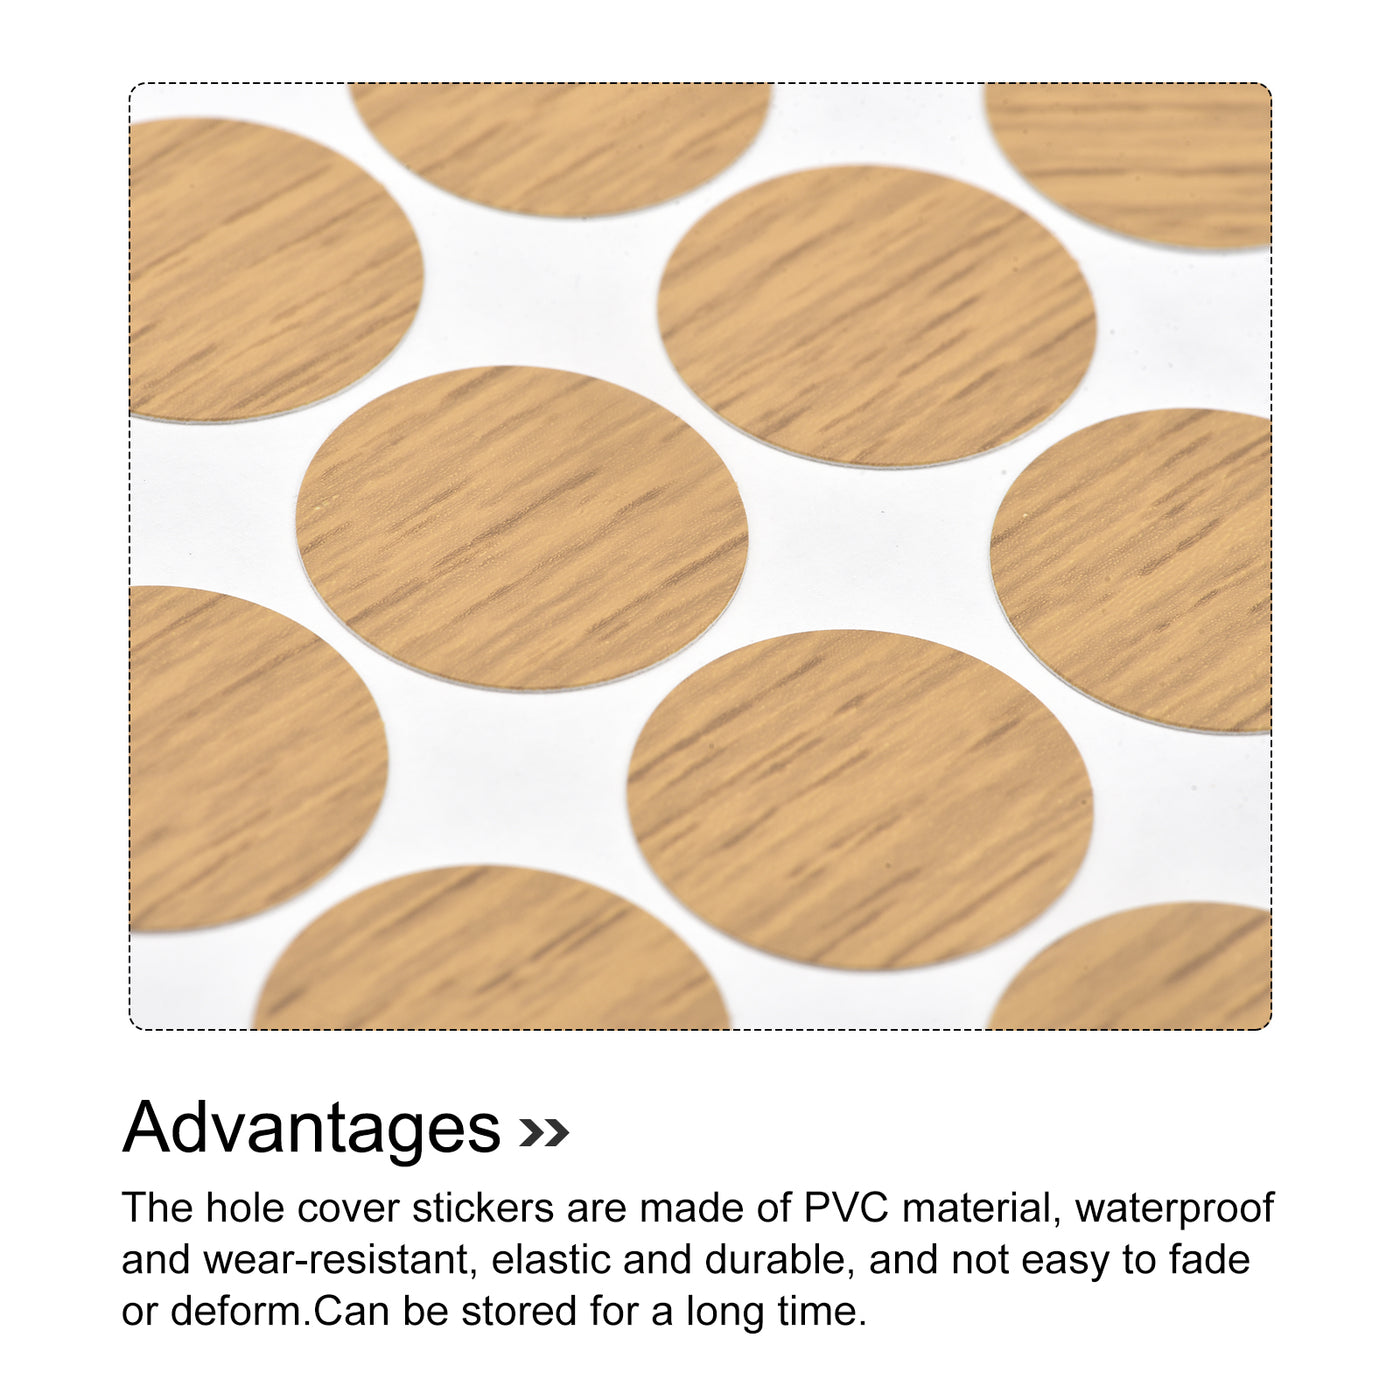 uxcell Uxcell Screw Hole Cover Stickers, 21mm Dia PVC Self Adhesive Covers Caps for Wood Furniture Cabinet Shelf Wardrobe, Maple 4 Sheet/216pcs